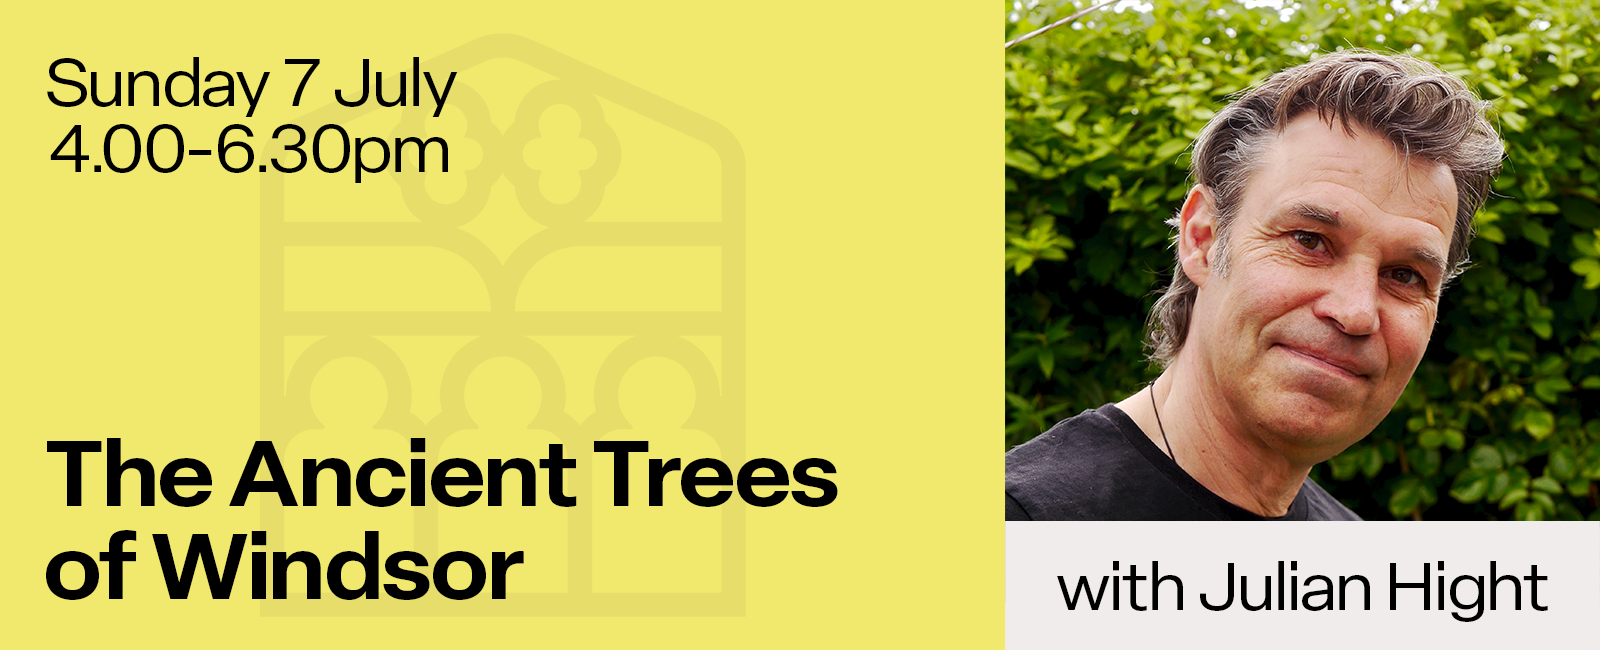 The Ancient Trees of Windsor with Julian Hight